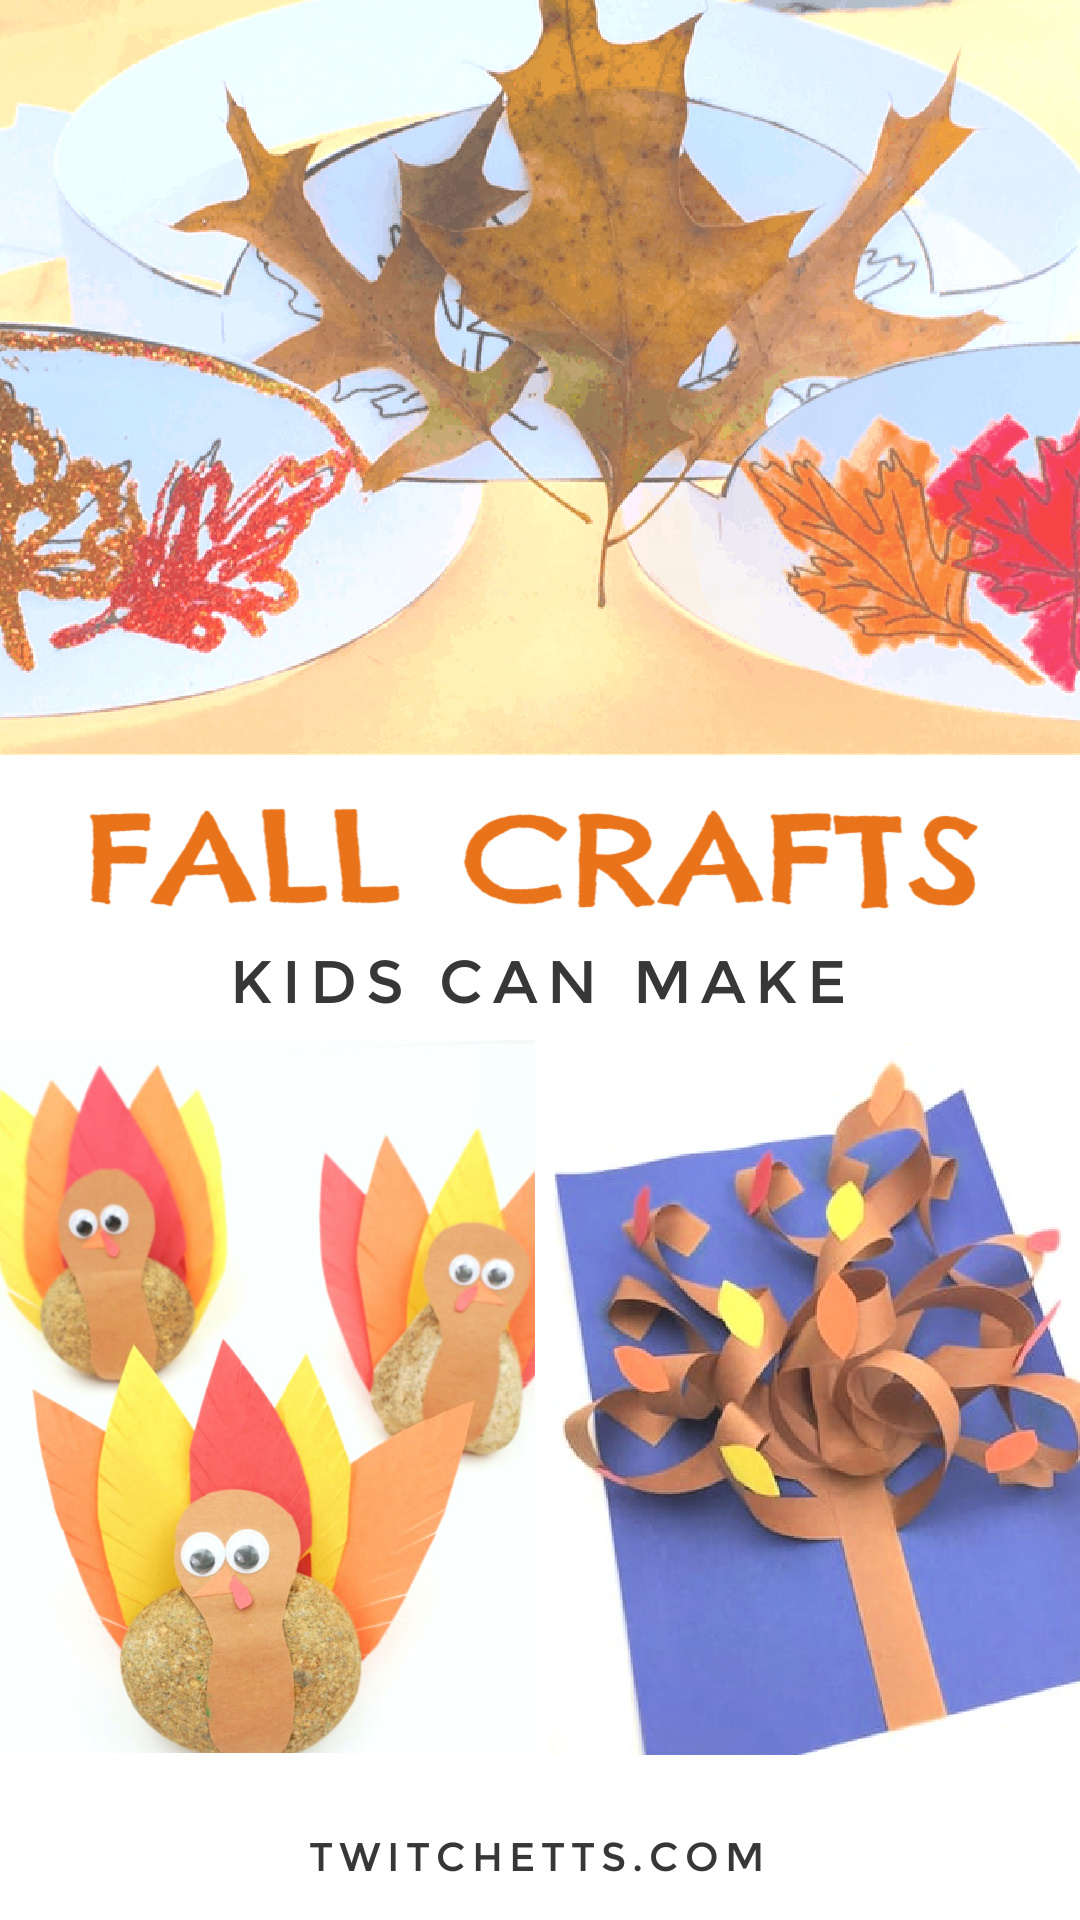 60+ Fall Crafts For Kids: Easy project ideas for autumn - Twitchetts